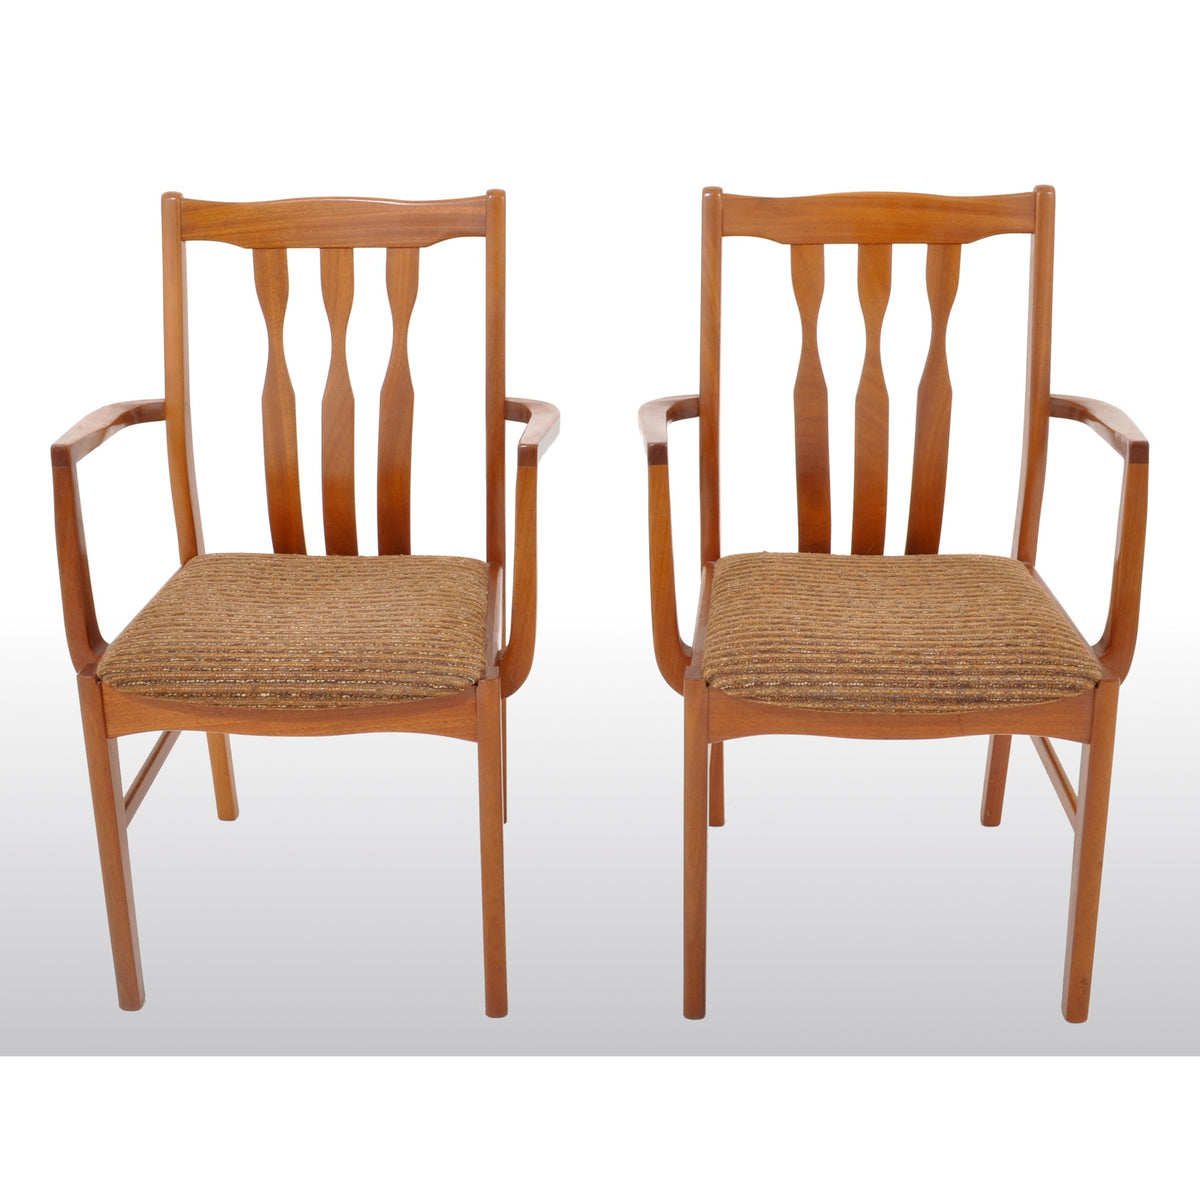 Pair of Mid-Century Modern Captain's/Arm Chairs in Teak, 1960s